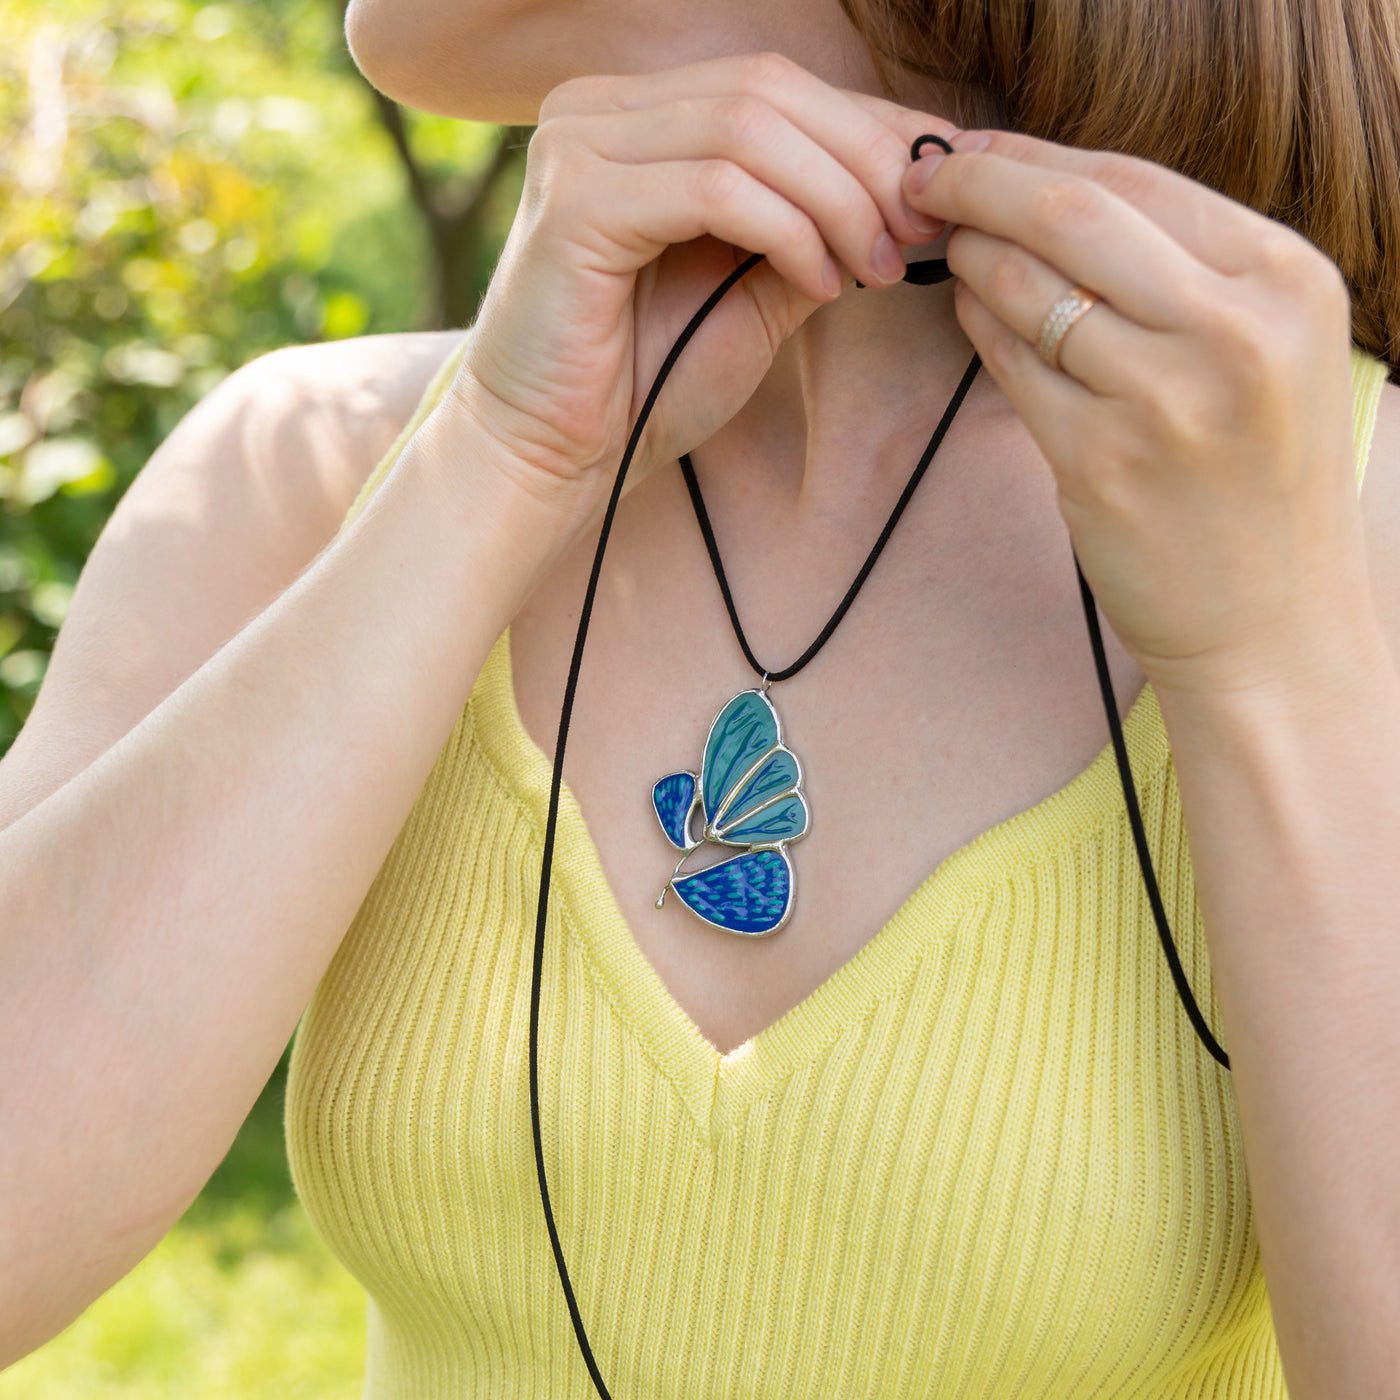 blue flower pendant made of stained glass